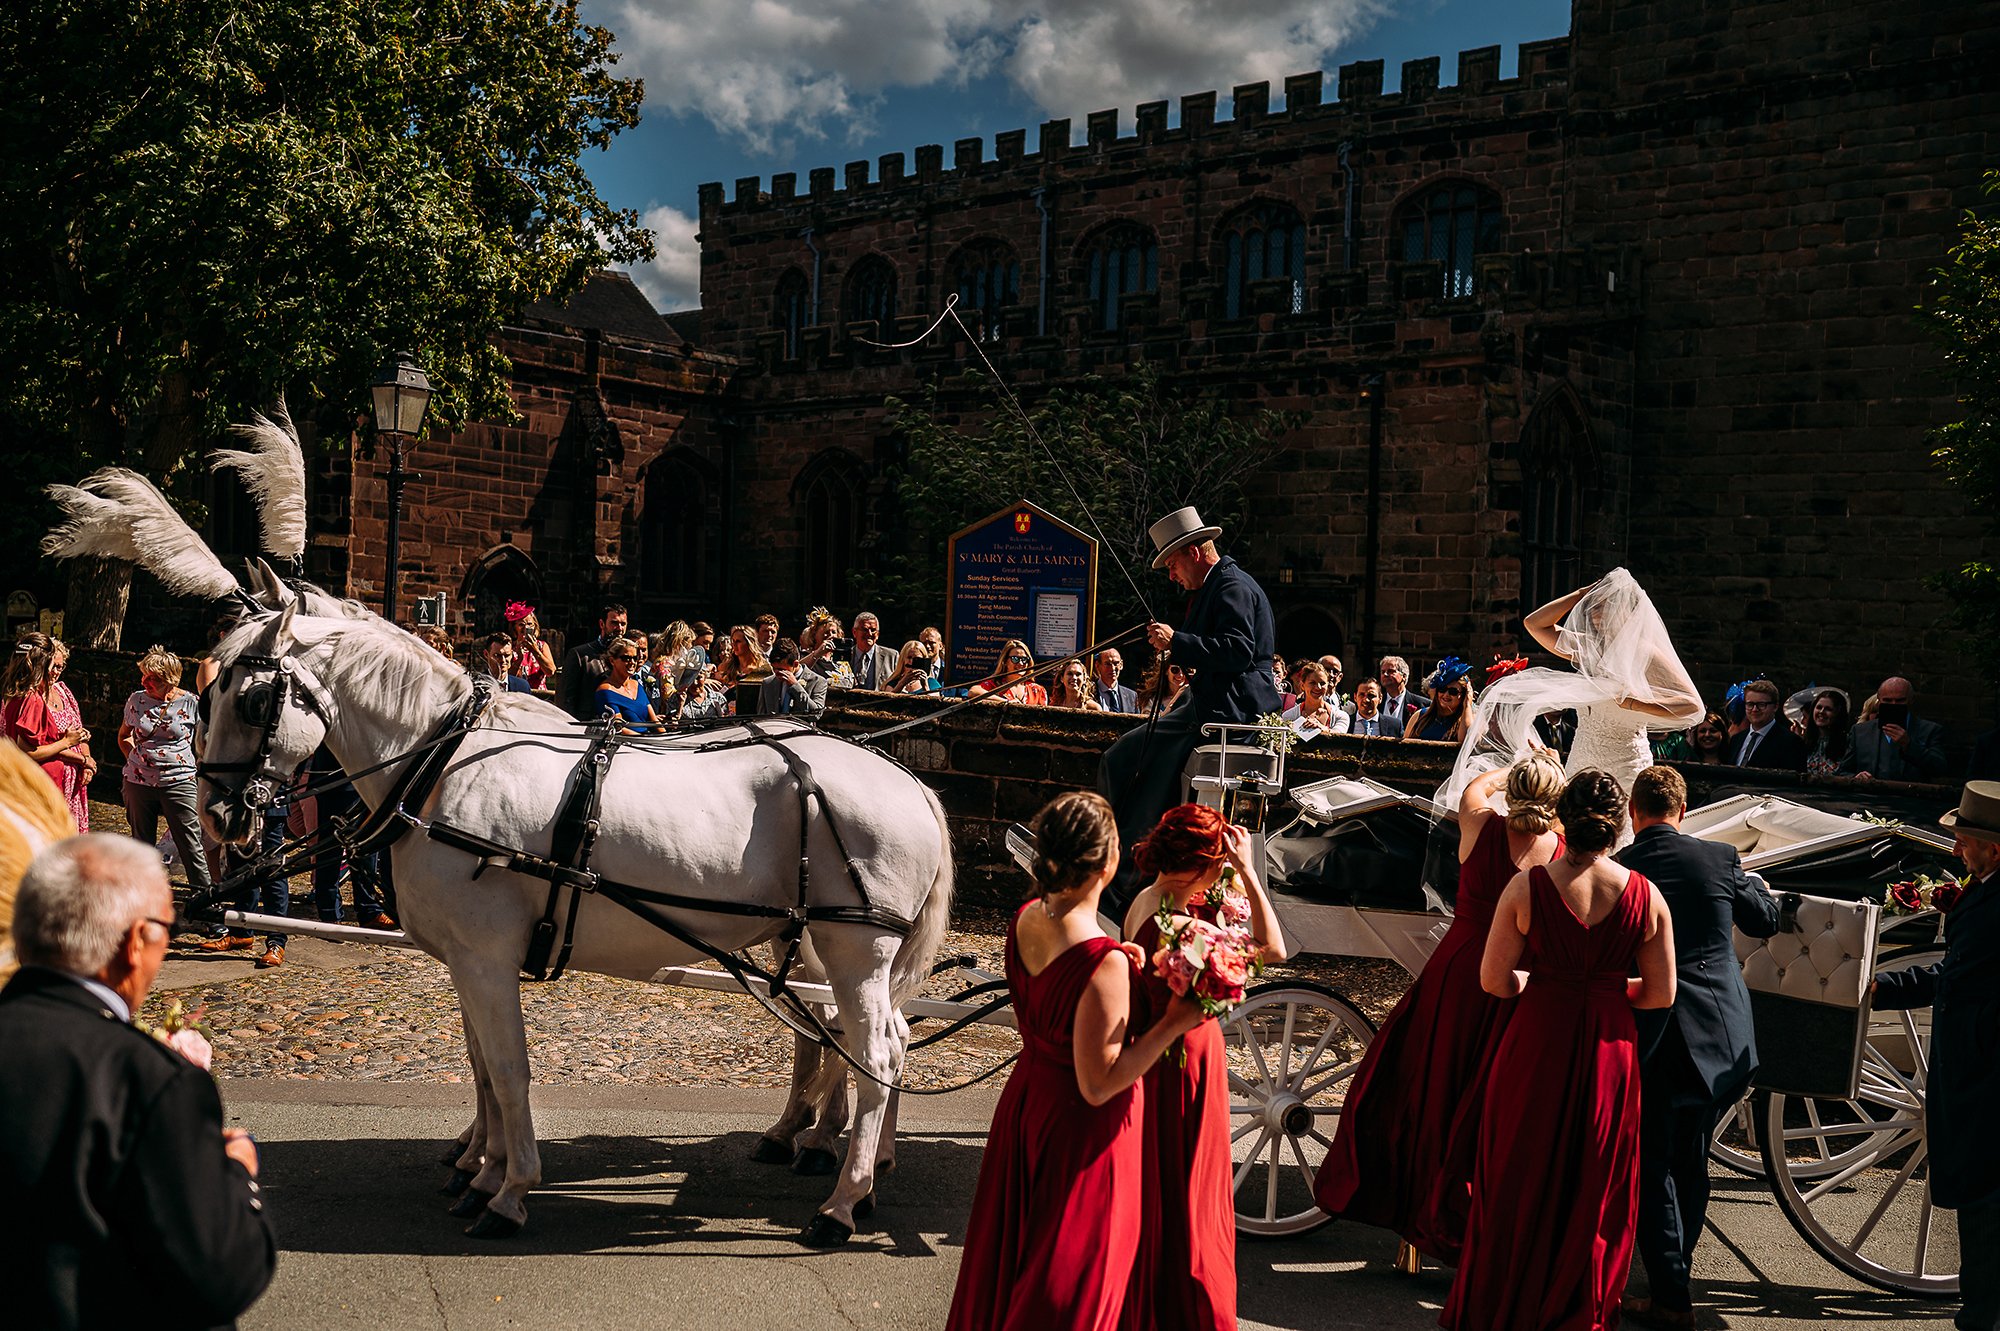  Bride mounting a horse and carriage to leave church. 